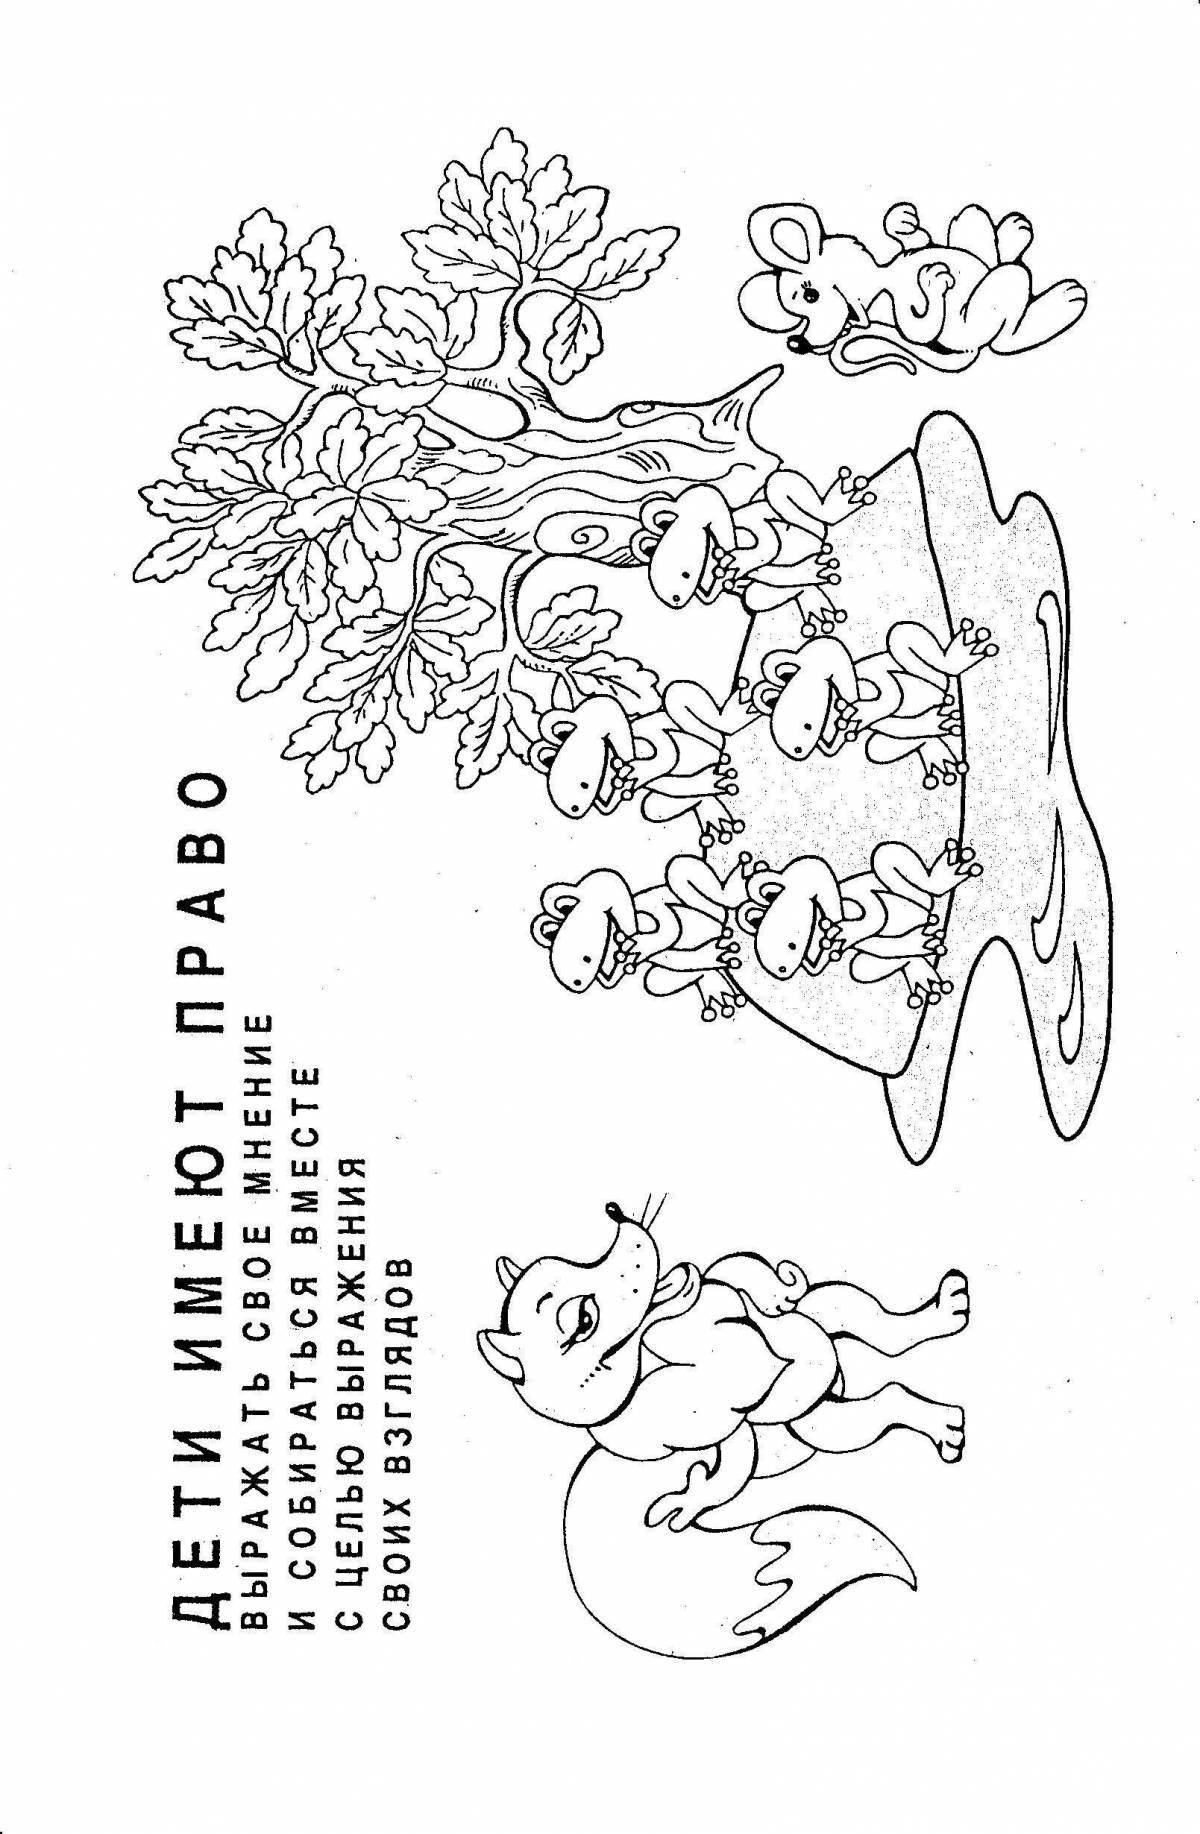 Children's rights creative coloring book